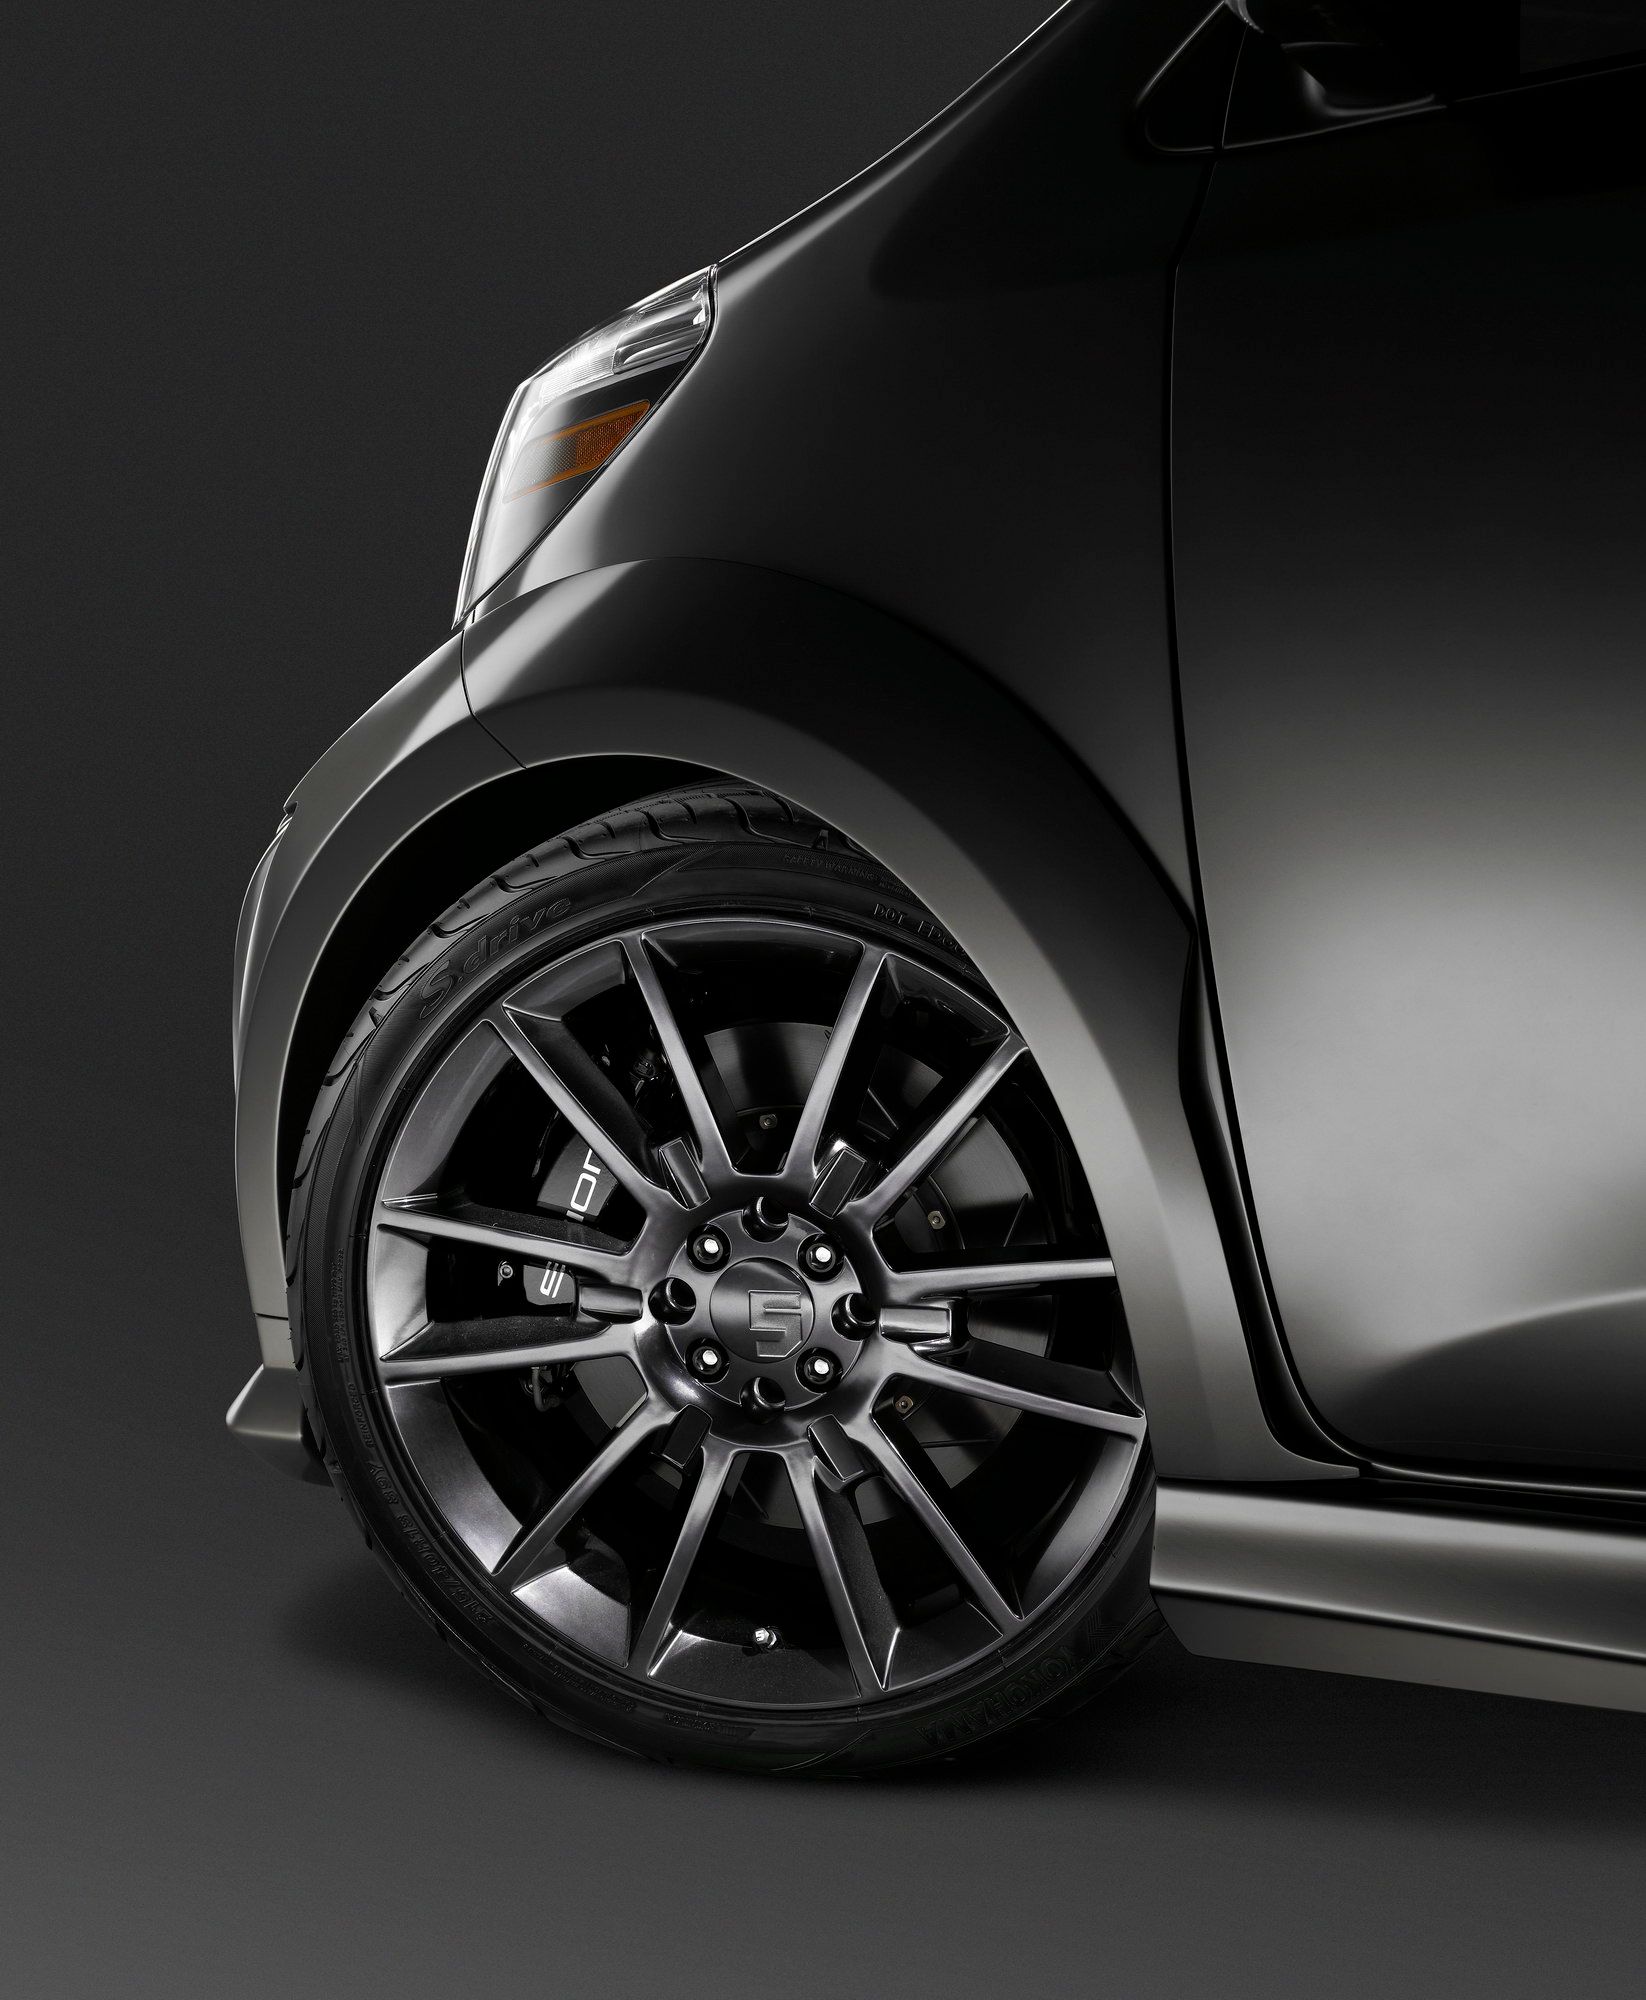 2011 Scion iQ by Five Axis